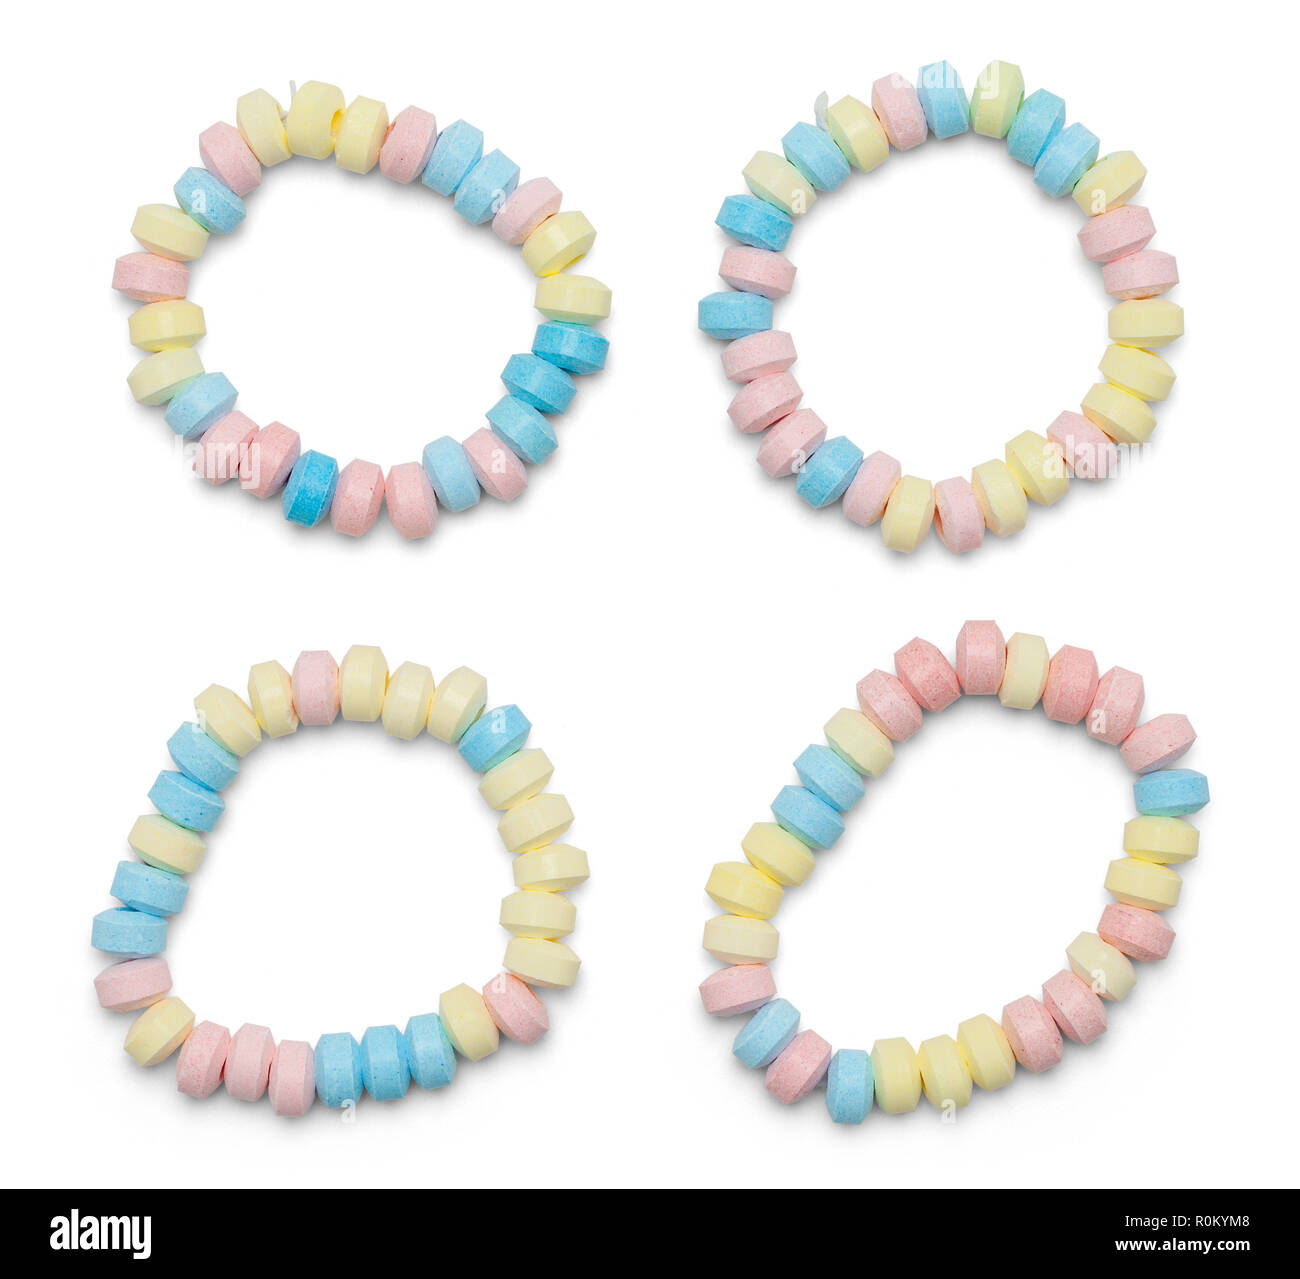 Four Candy Bead Bracelets Isolated on a White Background. Stock Photo